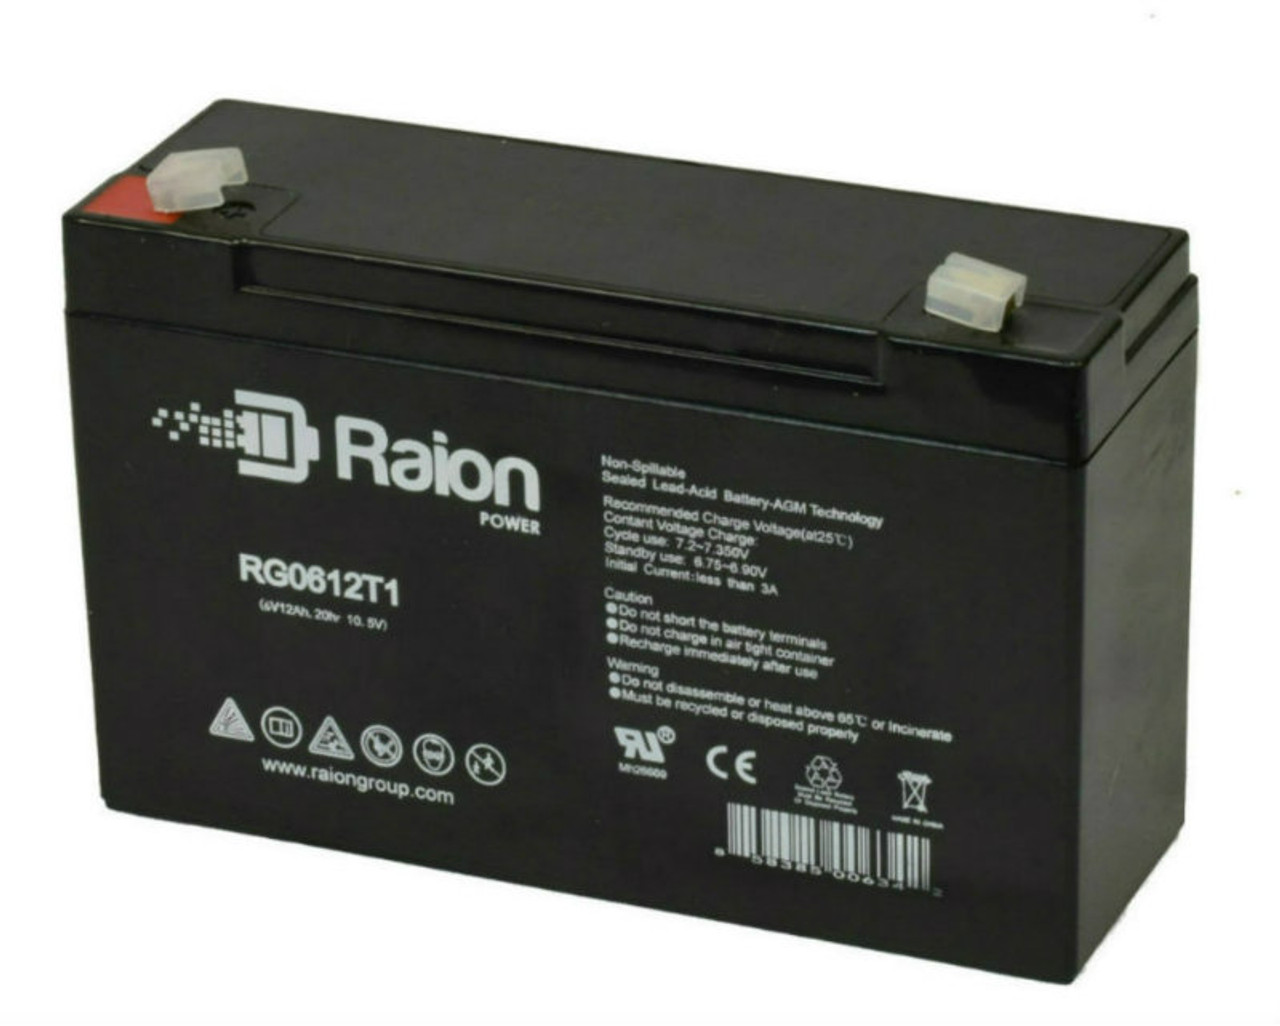 Raion Power RG06120T1 6V 12Ah Replacement UPS Battery Cartridge for Upsonic STATION 90